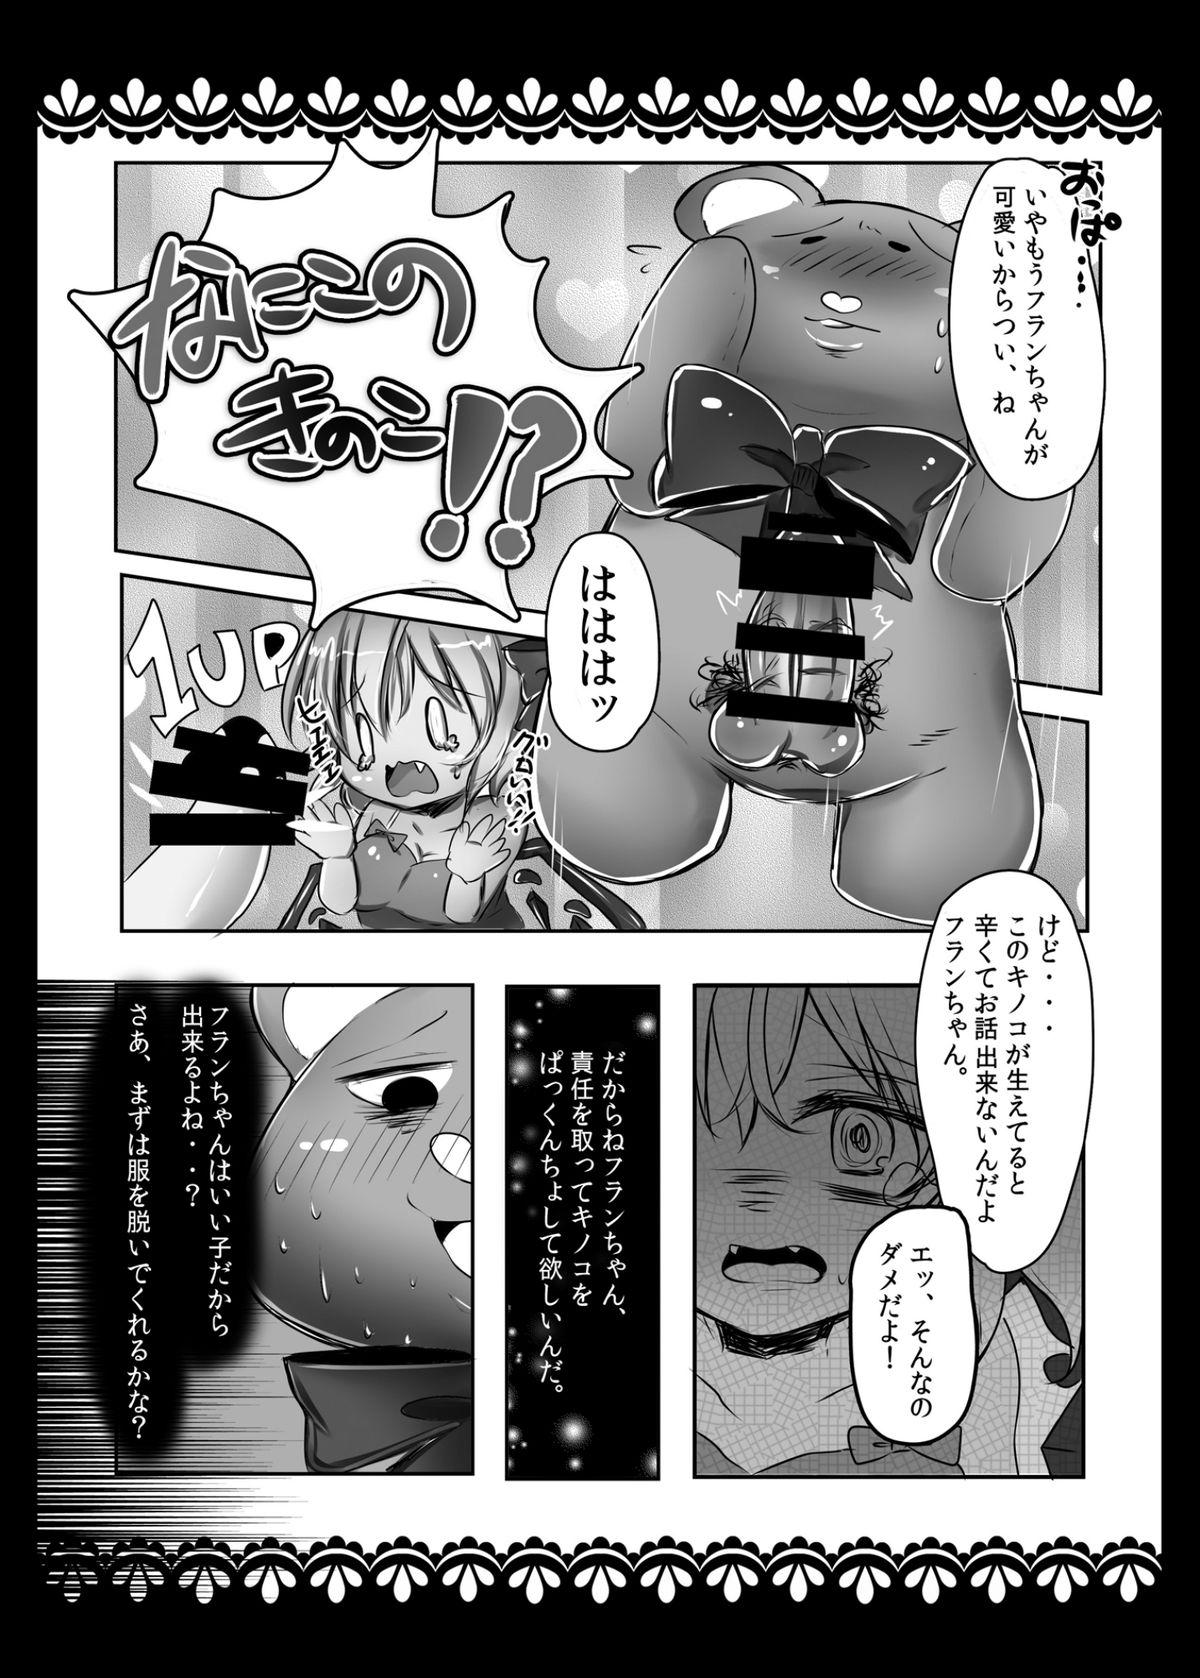 Office Sex Stuffed Animal Paco - Touhou project Femdom - Page 8